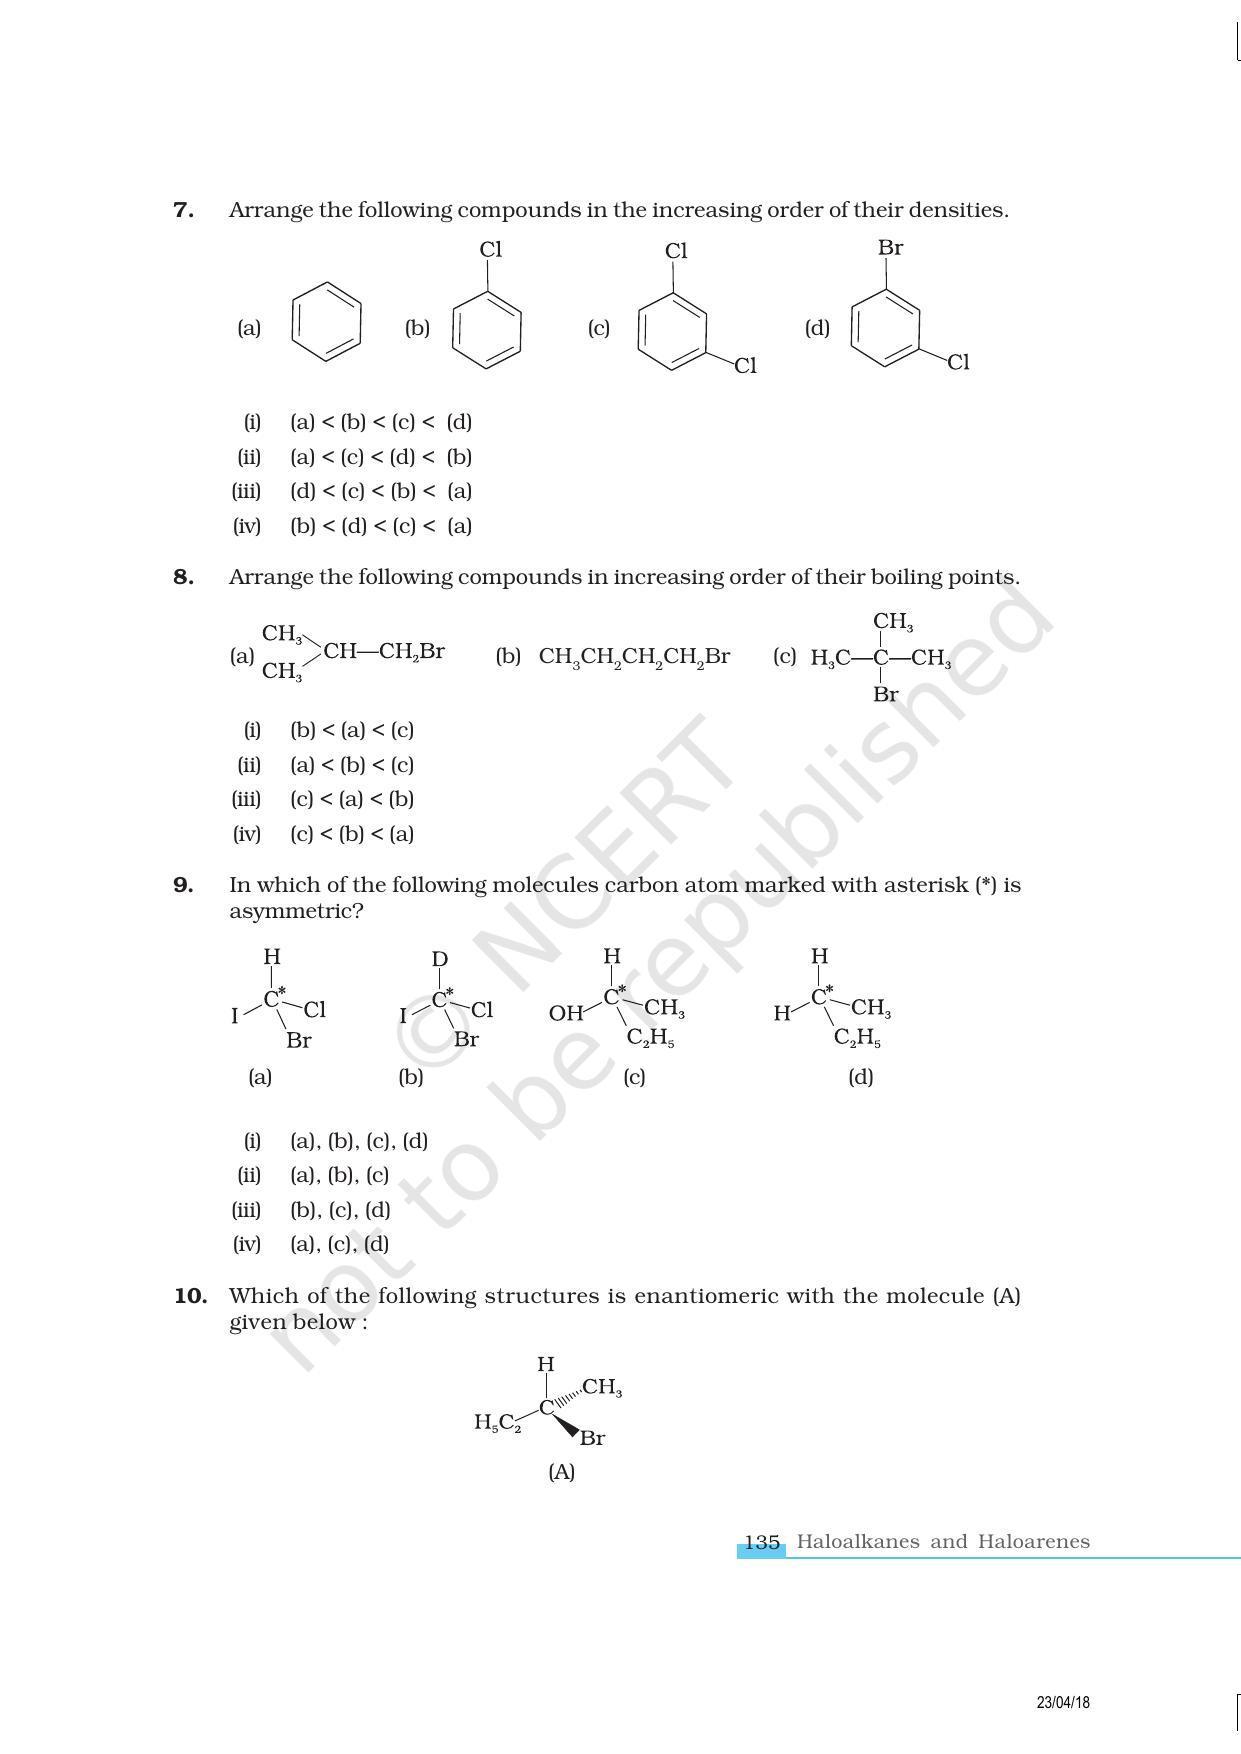 NCERT Exemplar Book for Class 12 Chemistry: Chapter 10 Haloalkanes and Haloarenes - Page 3